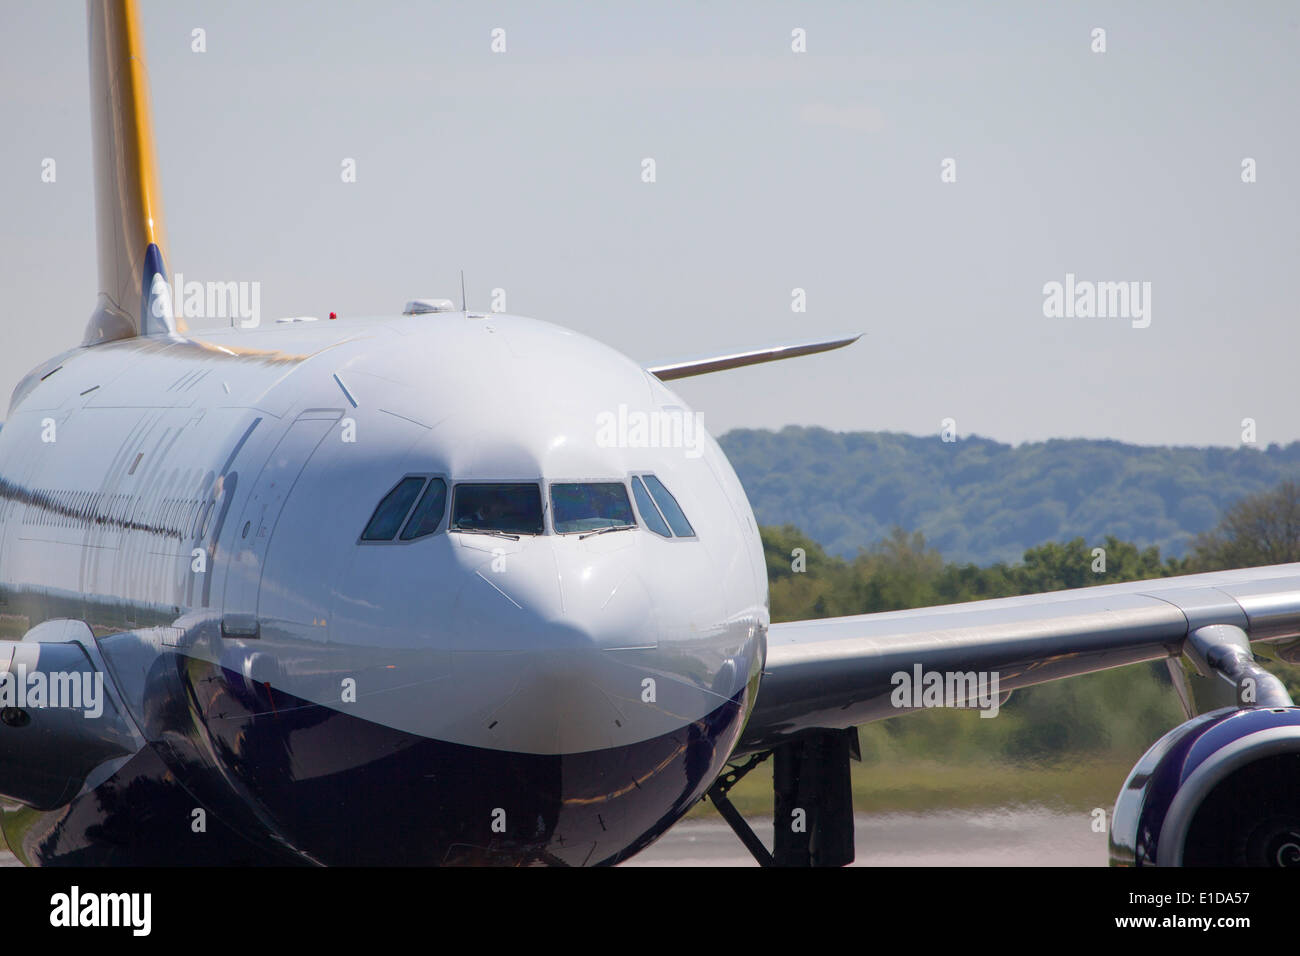 Monarch Airlines A330-200 Flugzeuge hautnah Stockfoto